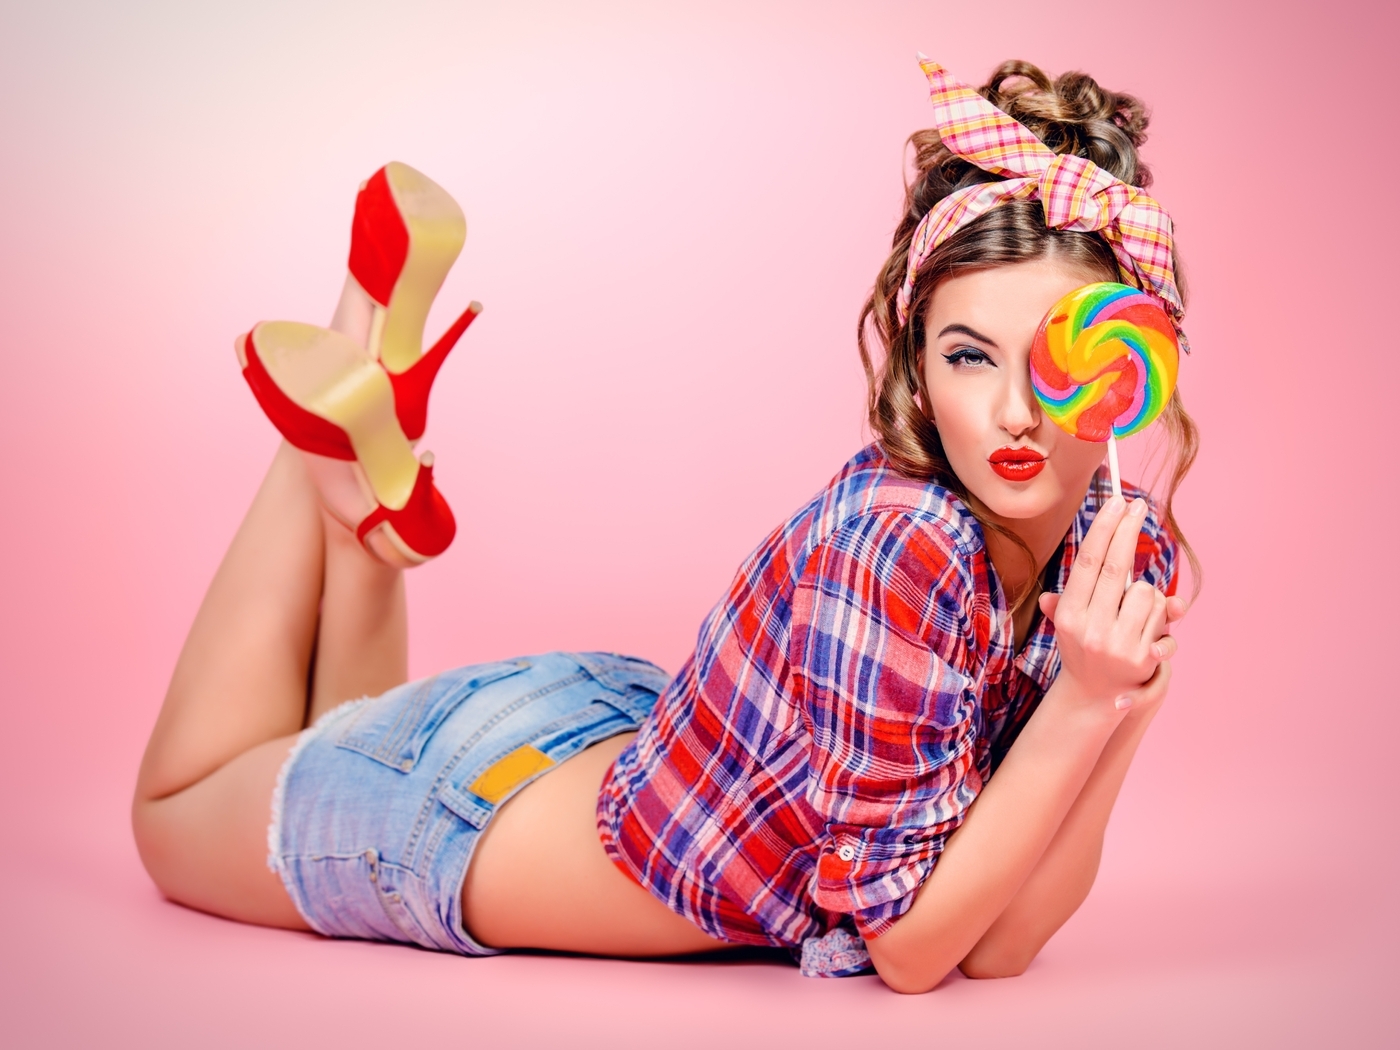 Image: Girl, squints, caramel, style, laying, shoes, feet, shirt, pink background